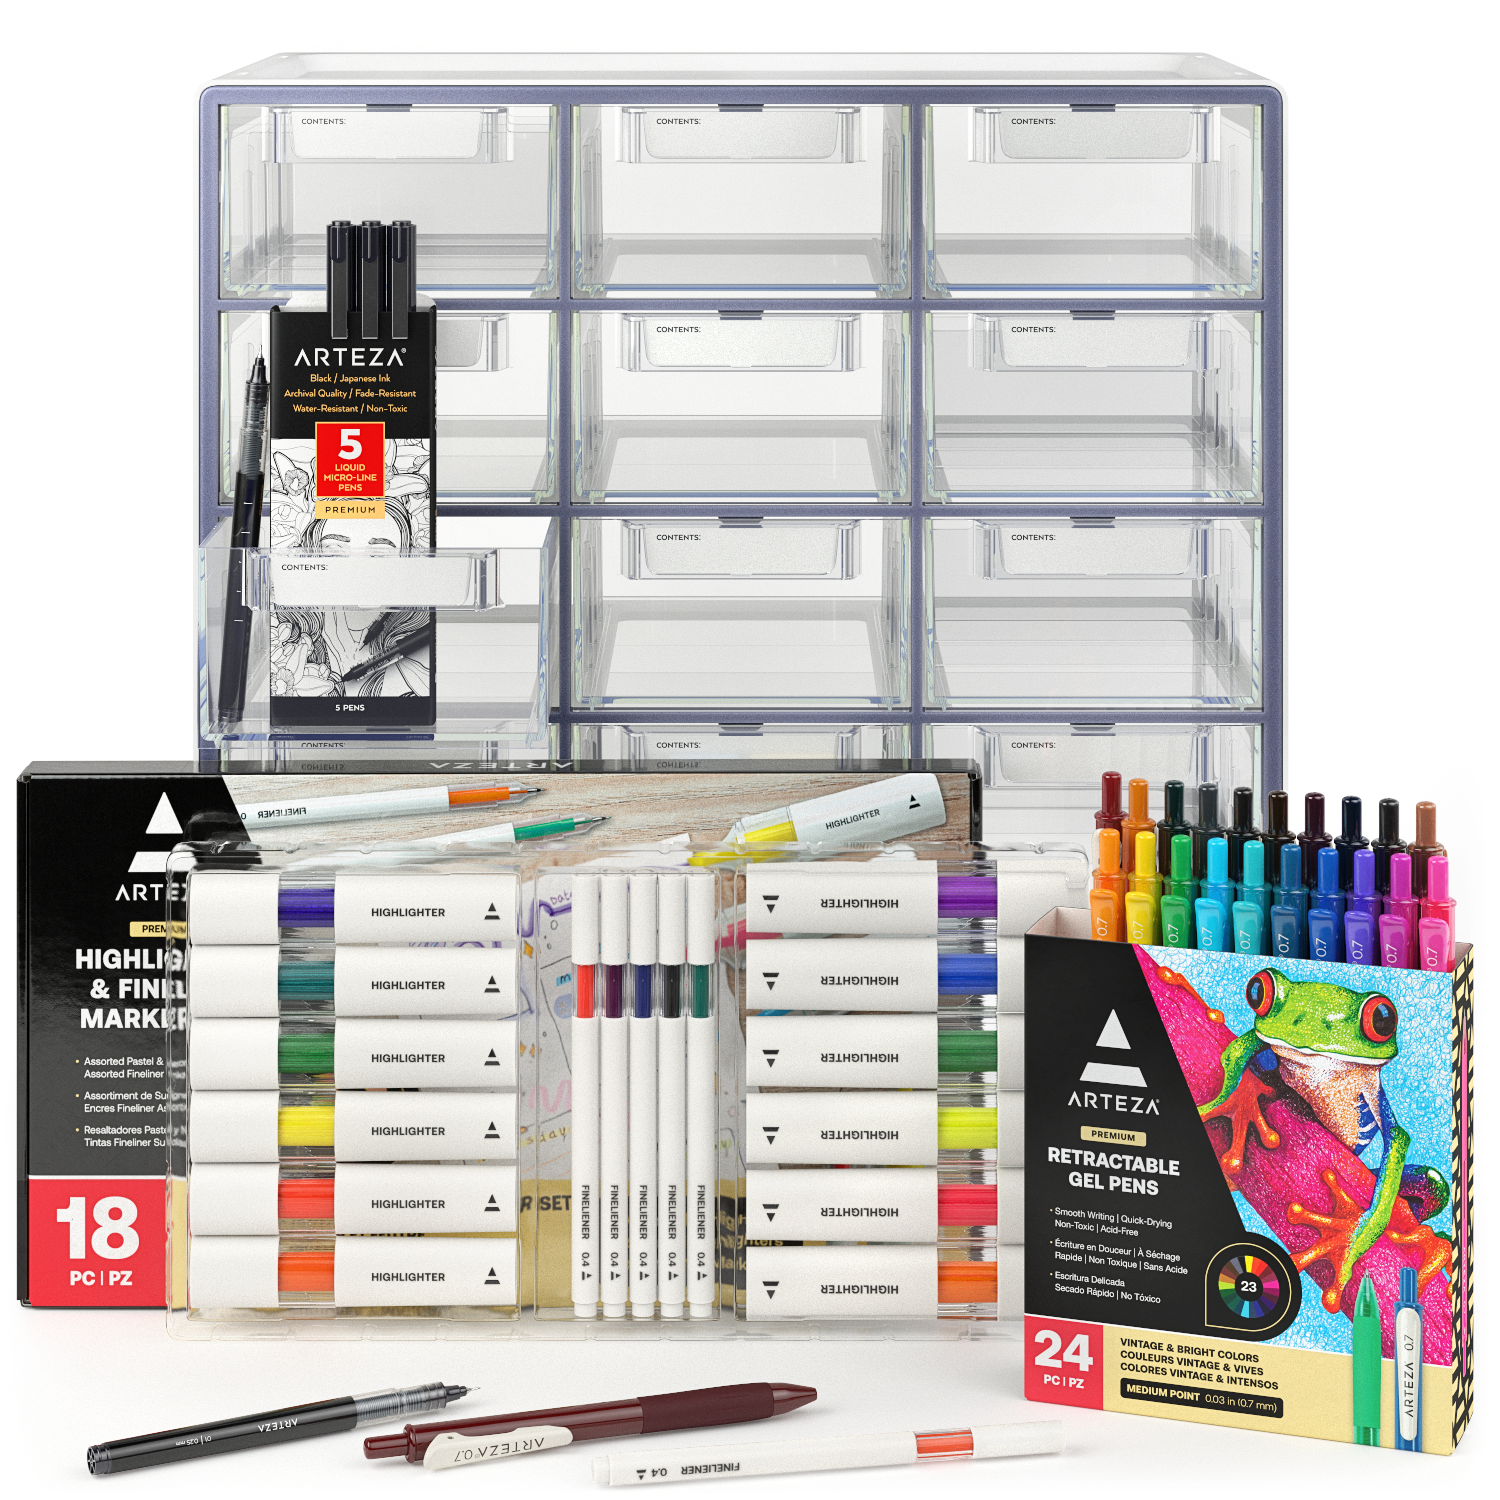 ARTEZA Micro-Line Ink Pens, Set of 5, Black Fineliners with